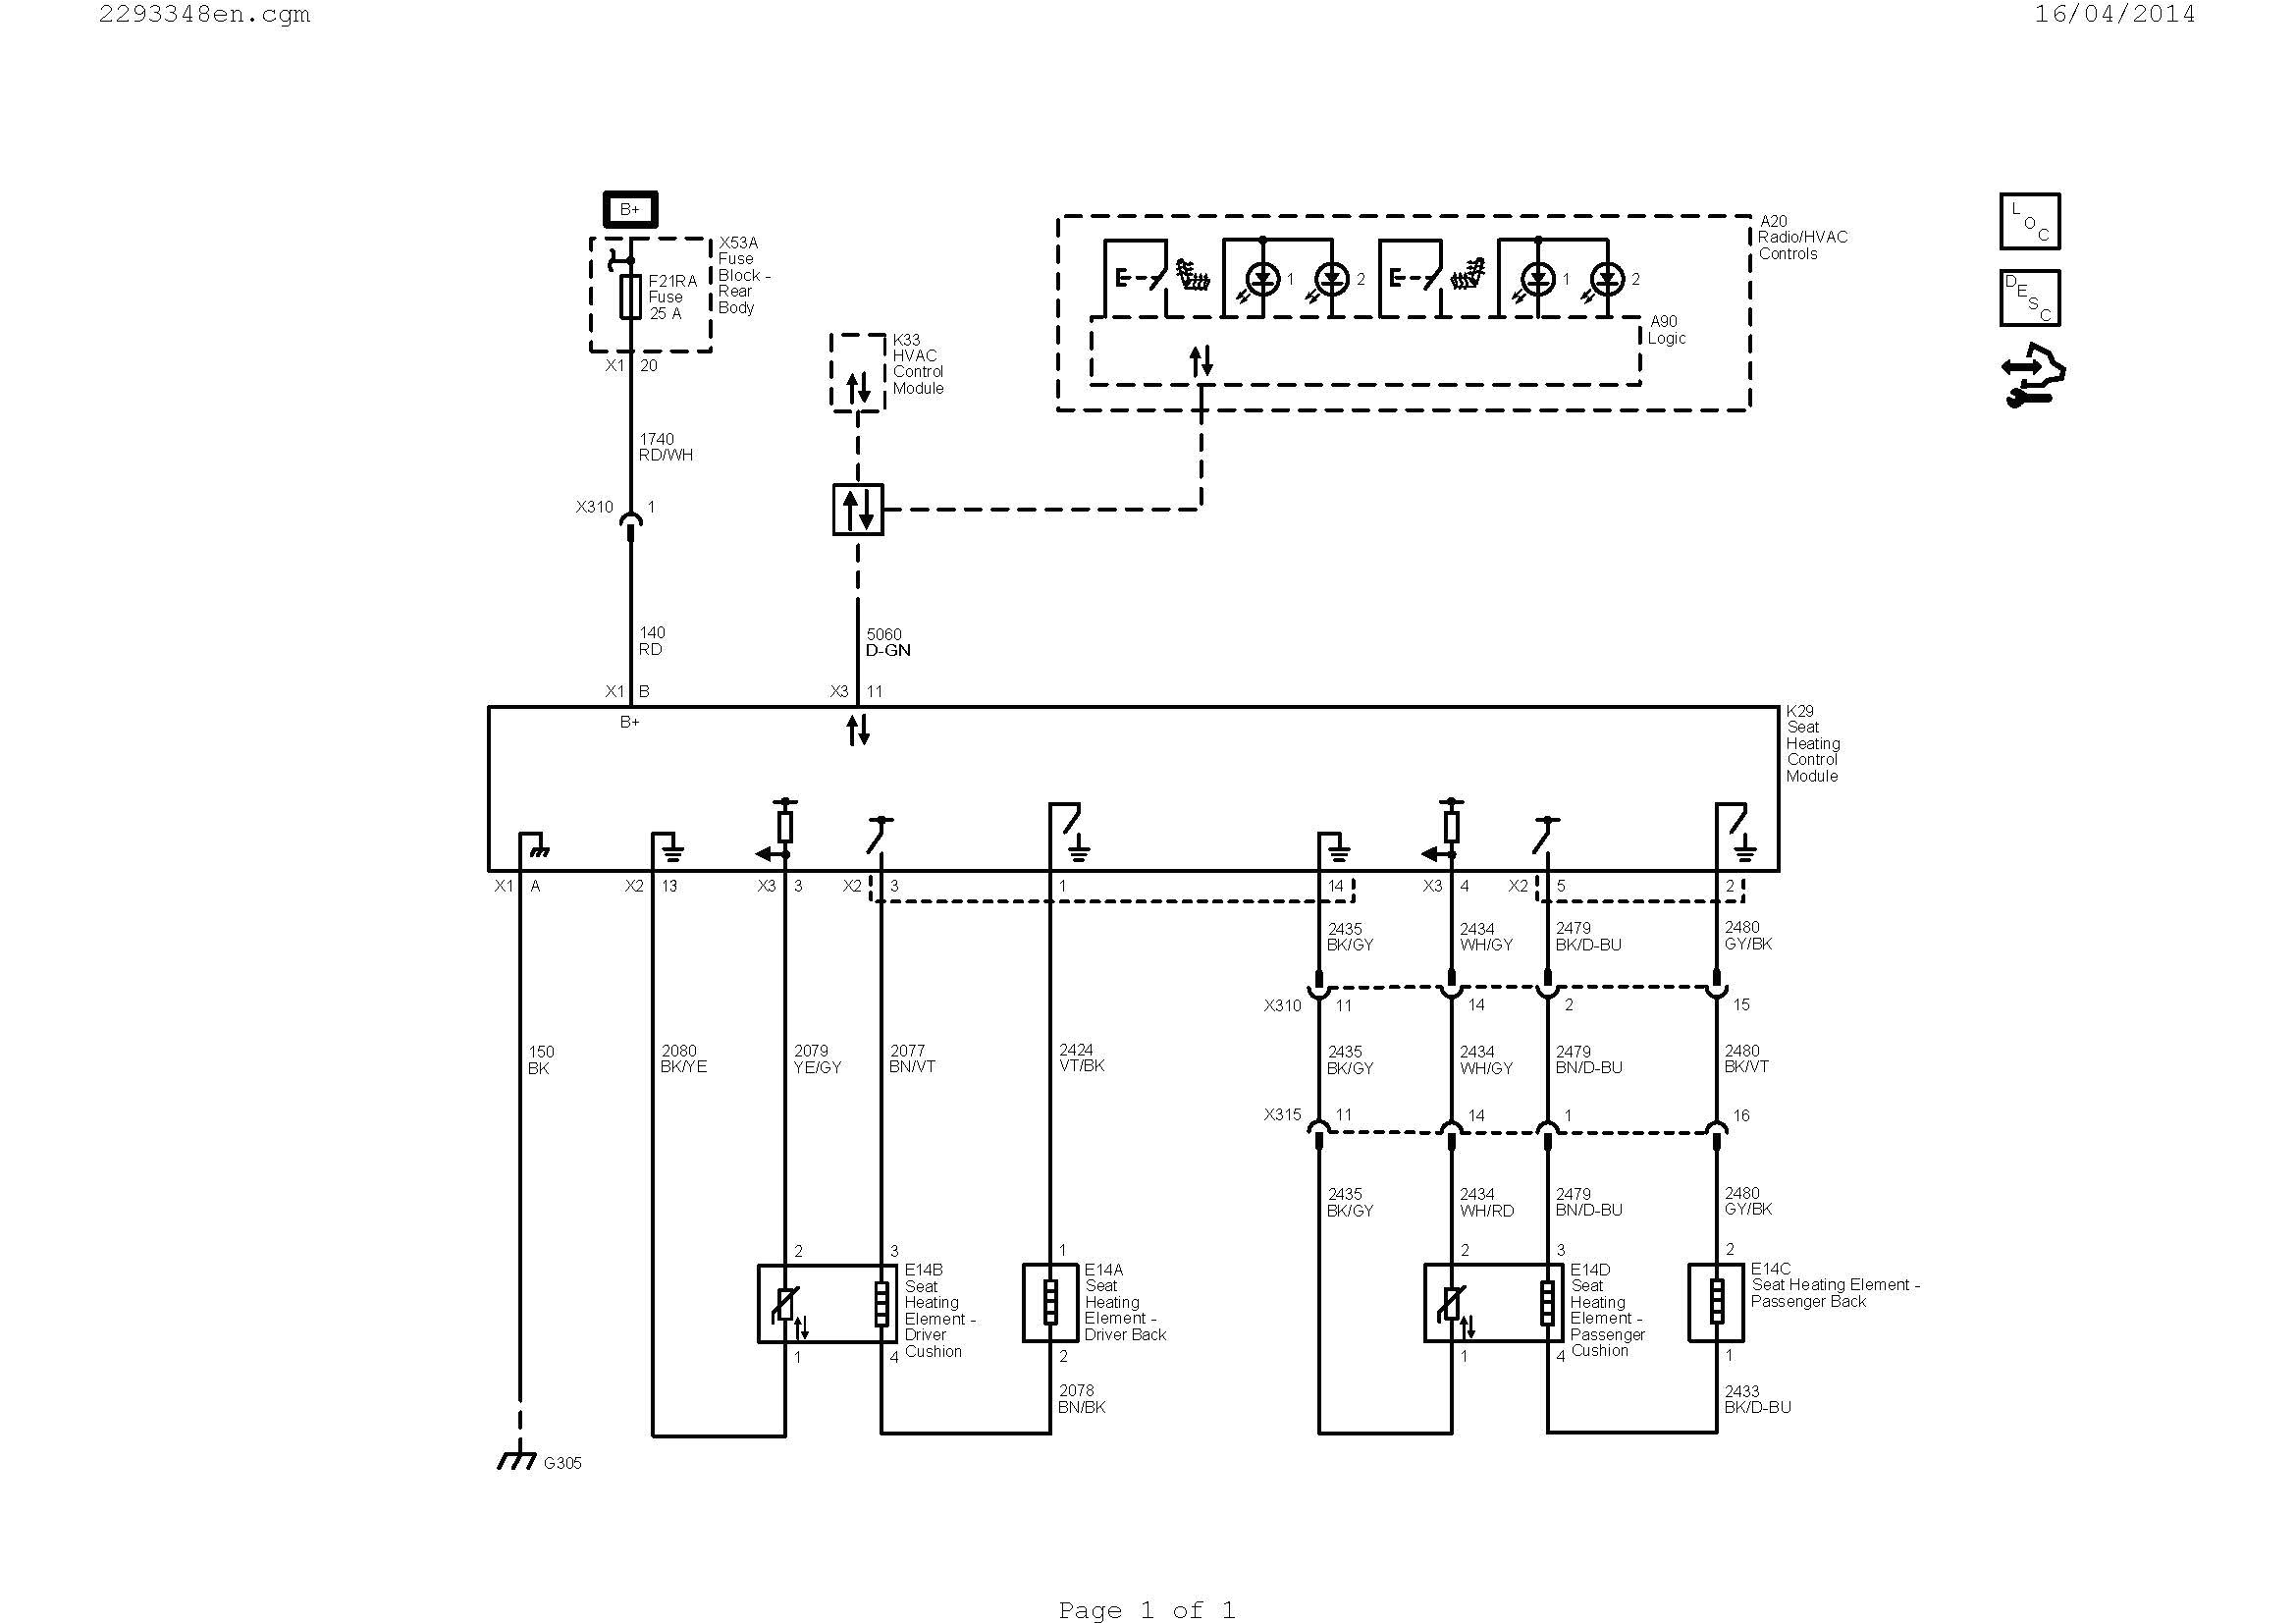 7 wire thermostat wiring diagram wiring a ac thermostat diagram new wiring diagram ac valid hvac diagram best hvac diagram 0d wire 18d jpg